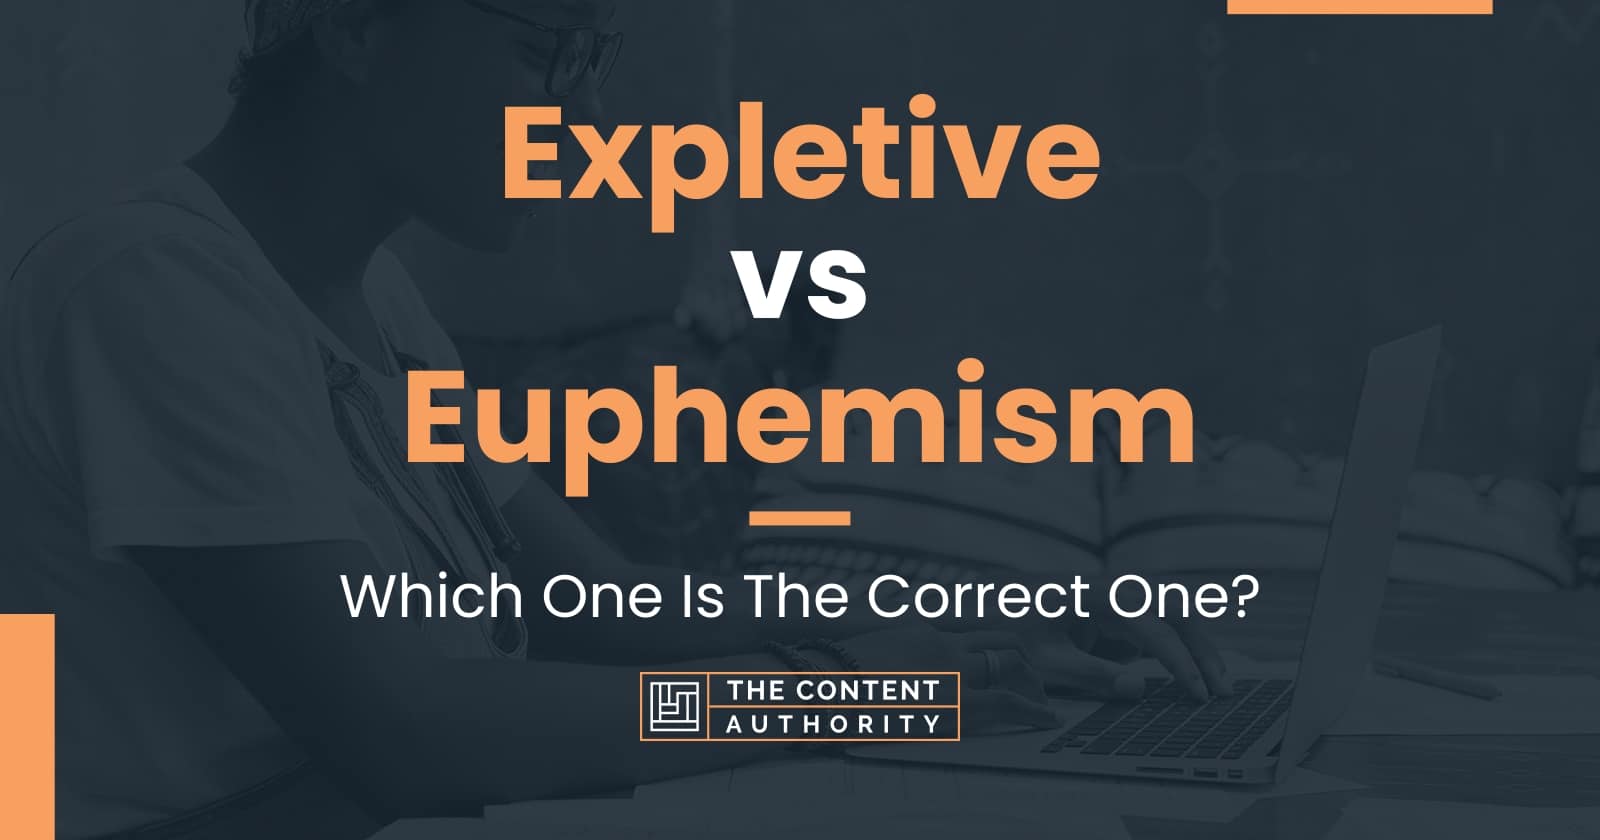 Expletive vs Euphemism: Which One Is The Correct One?